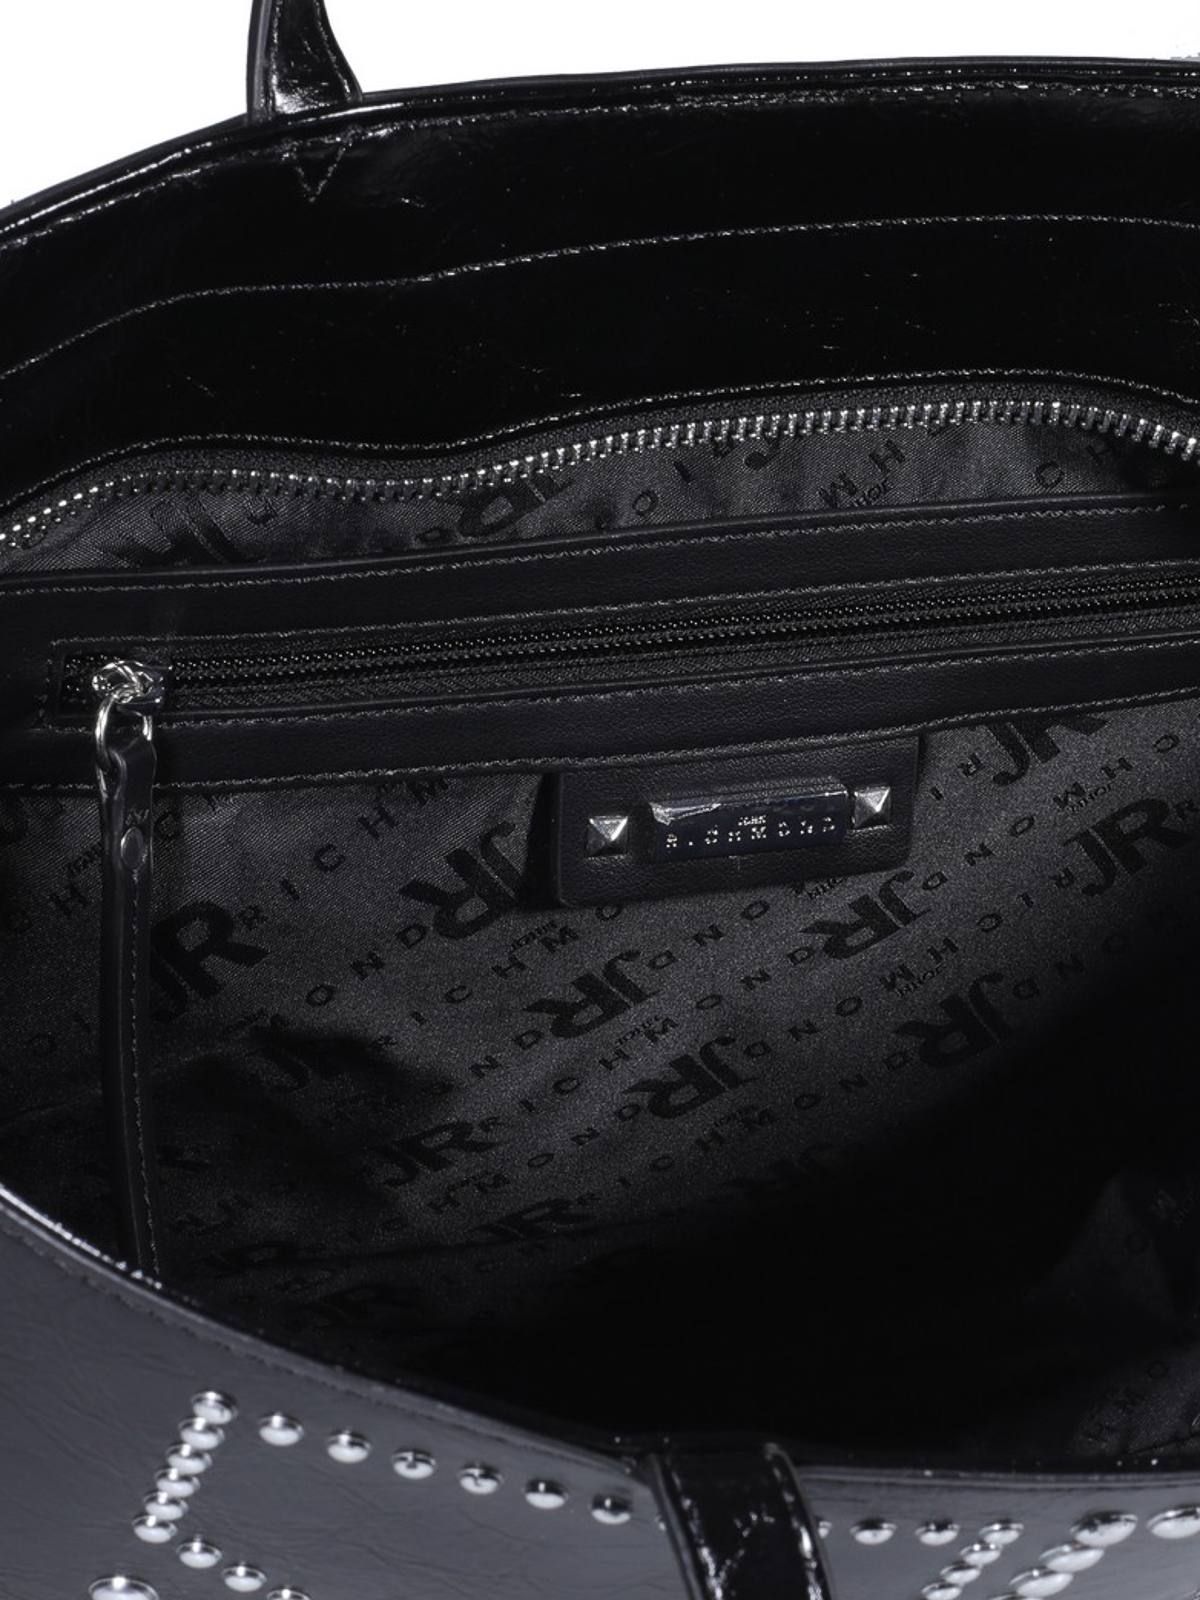 Armani Jeans Black Overnight Bag with AJ Logo - Bags from